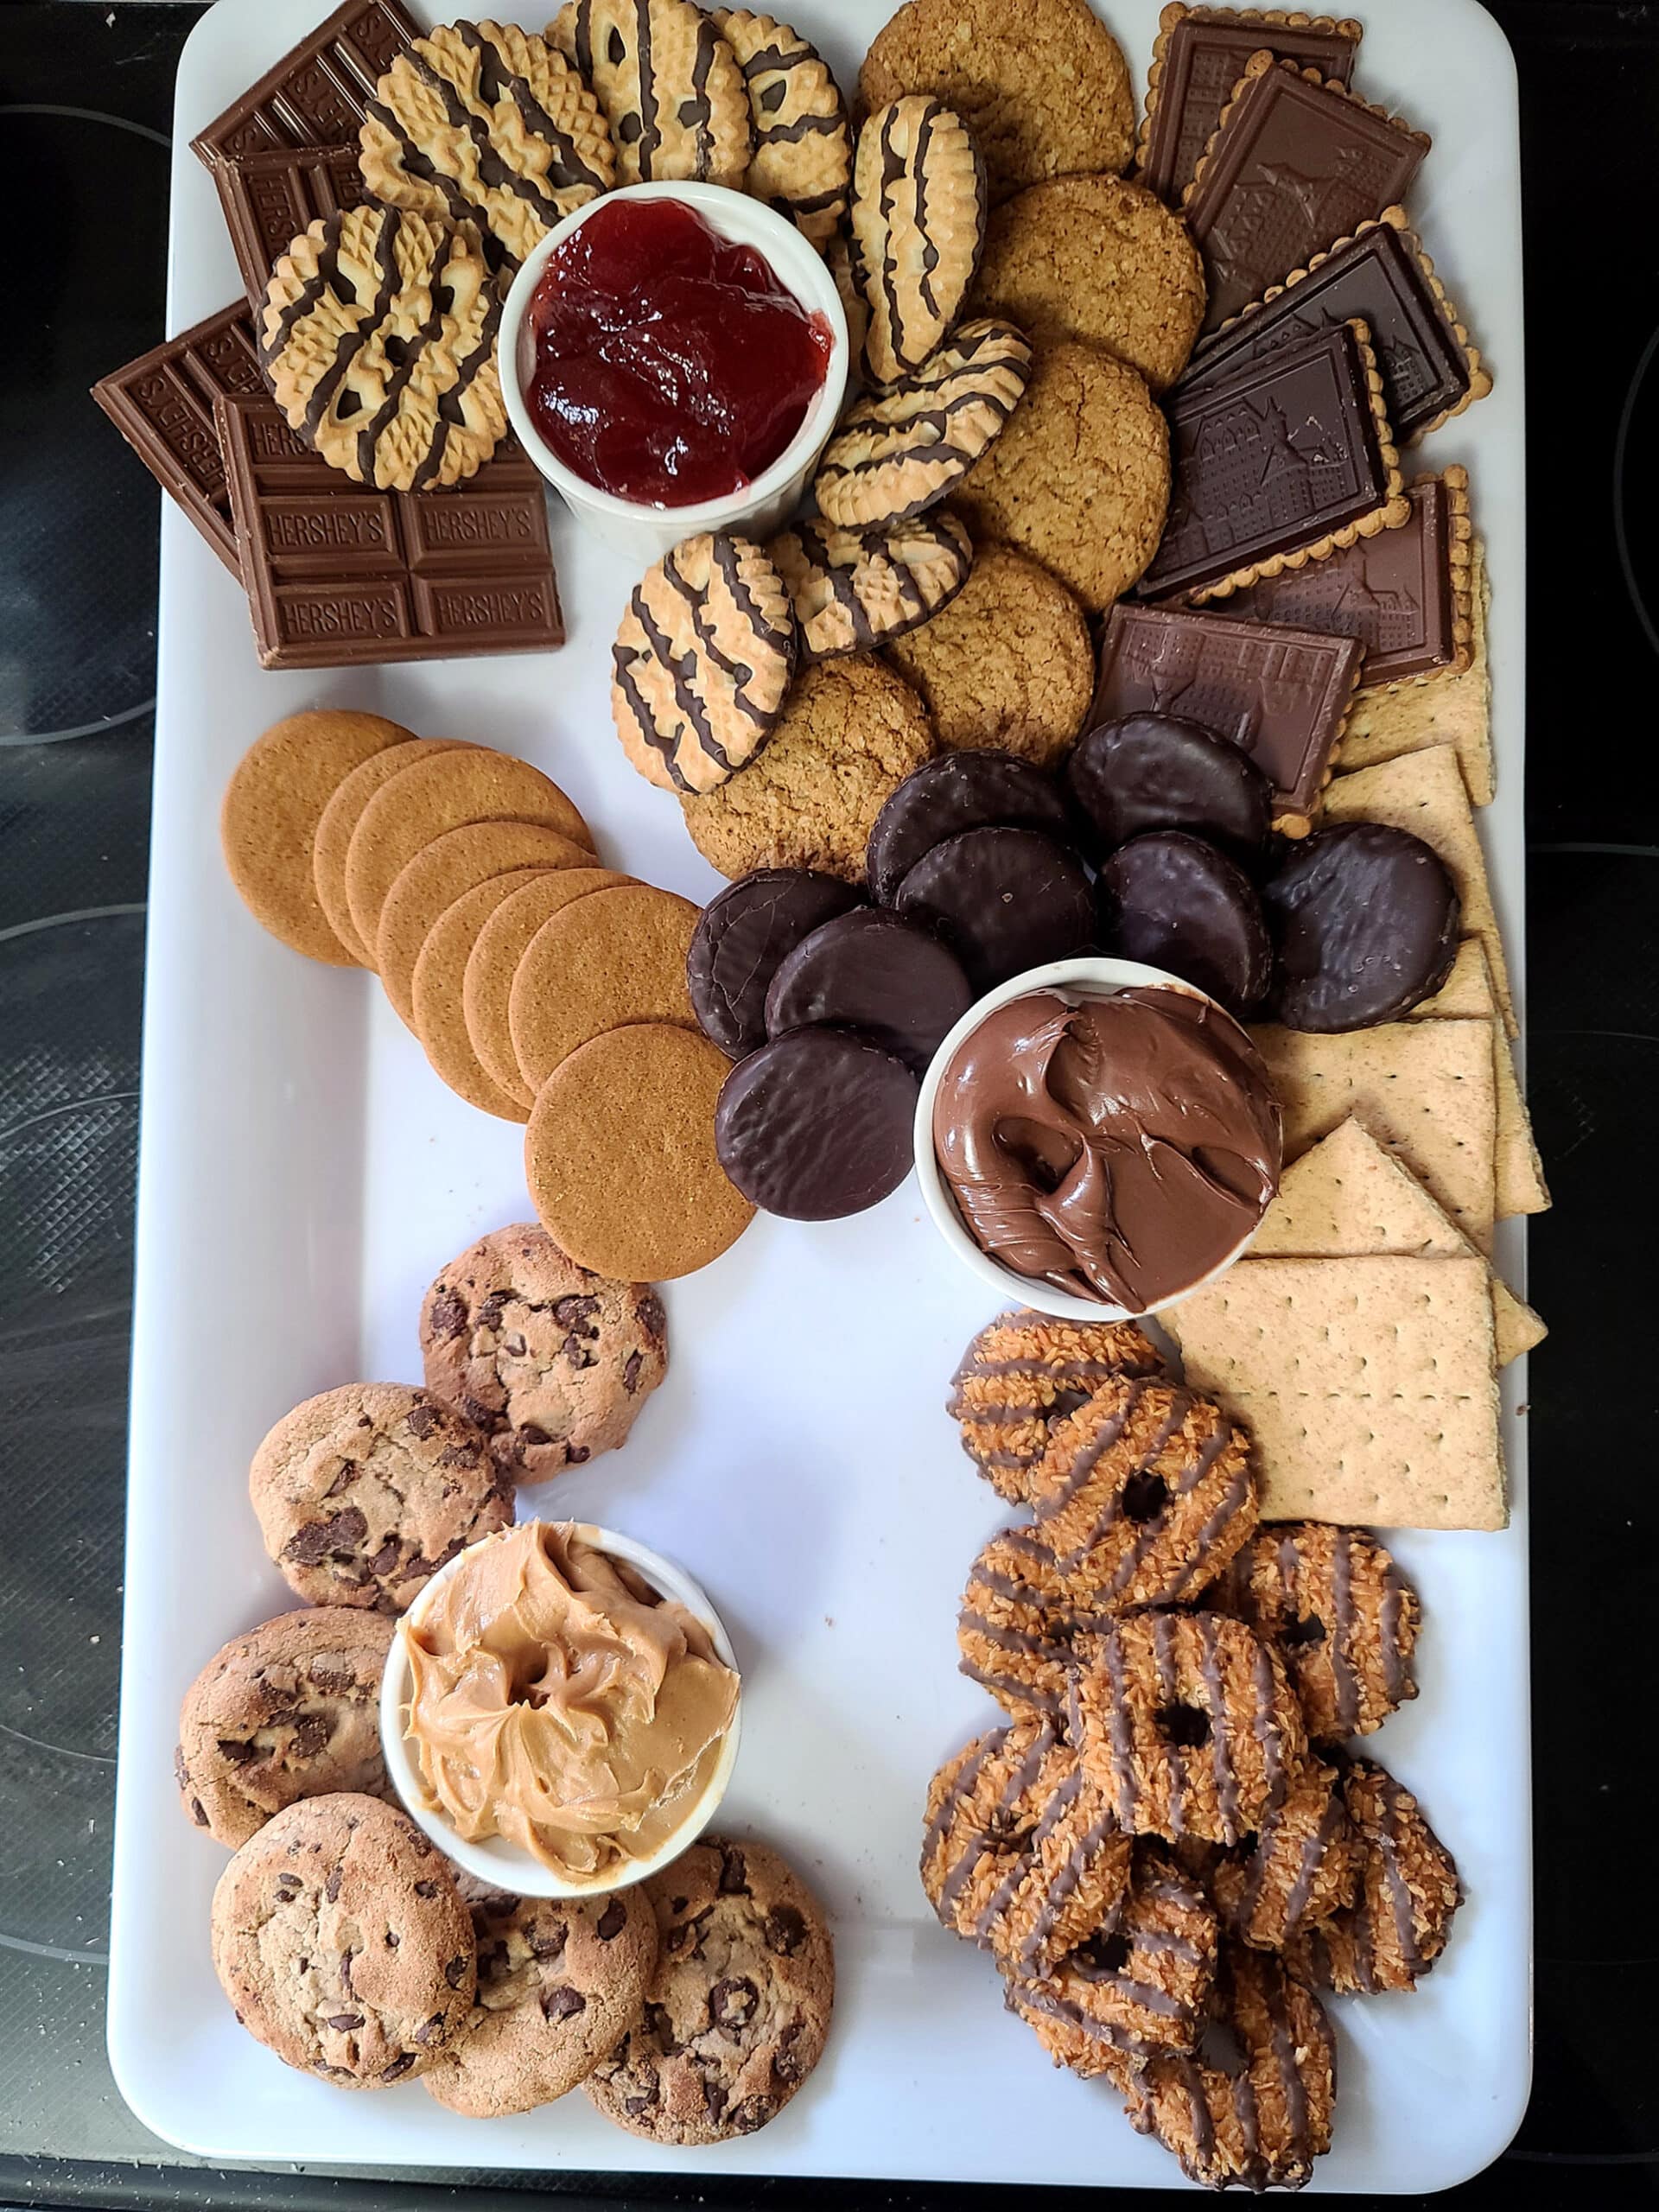 Pieces of chocolate added to the cookies and ramekins of dips.